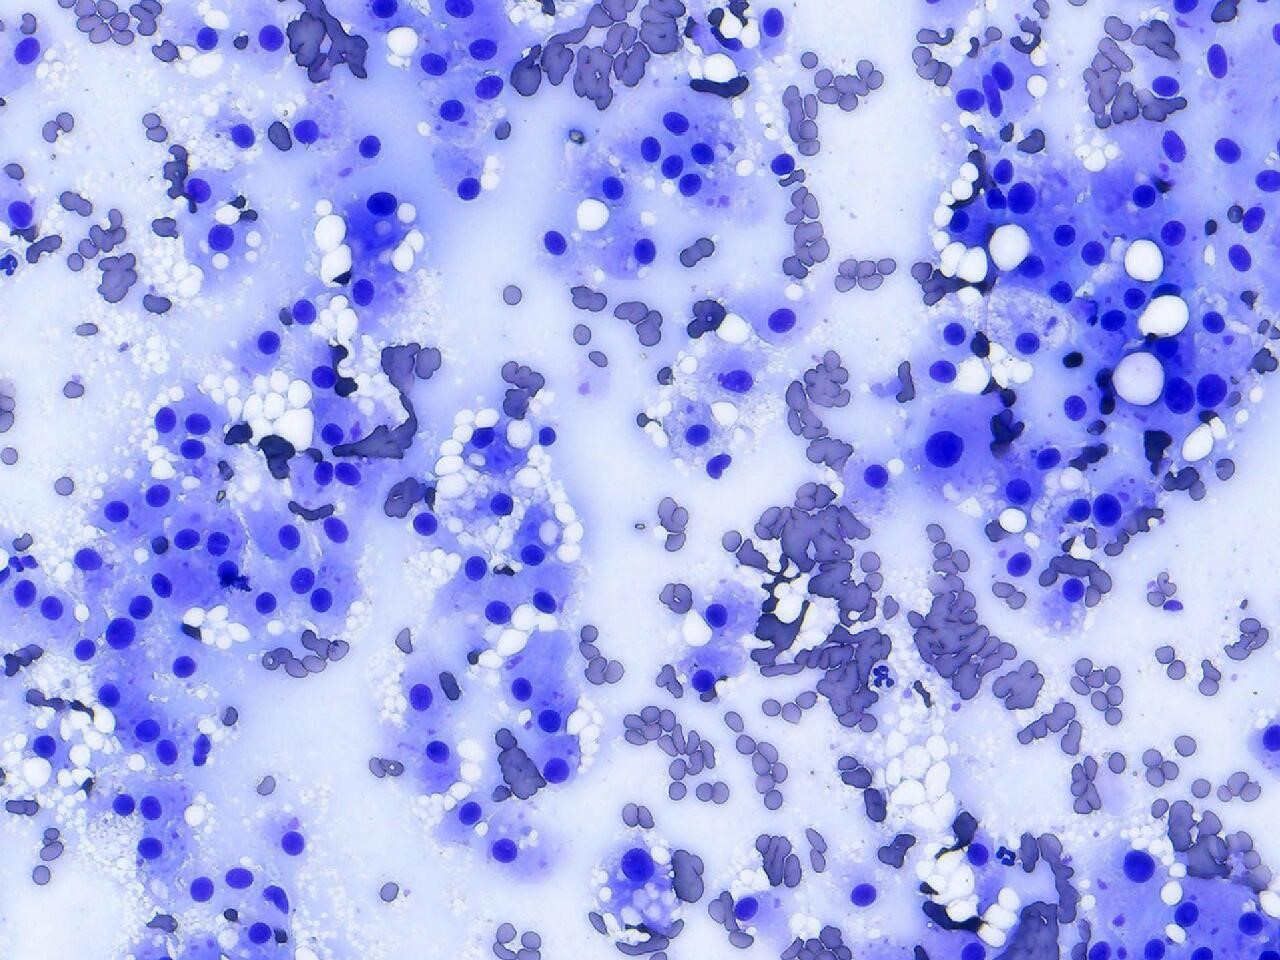 Liver aspirates from a dog with well-differentiated hepatocellular carcinoma. You can see that the neoplastic hepatocyte nuclei are round, 2x the diameter of an RBC and placed in the center of the cells. The cytoplasm is the pale blue color that surrounds the nuclei. Sometimes the cytoplasm has variably sized lipid droplets within the cytoplasm. 50x objective